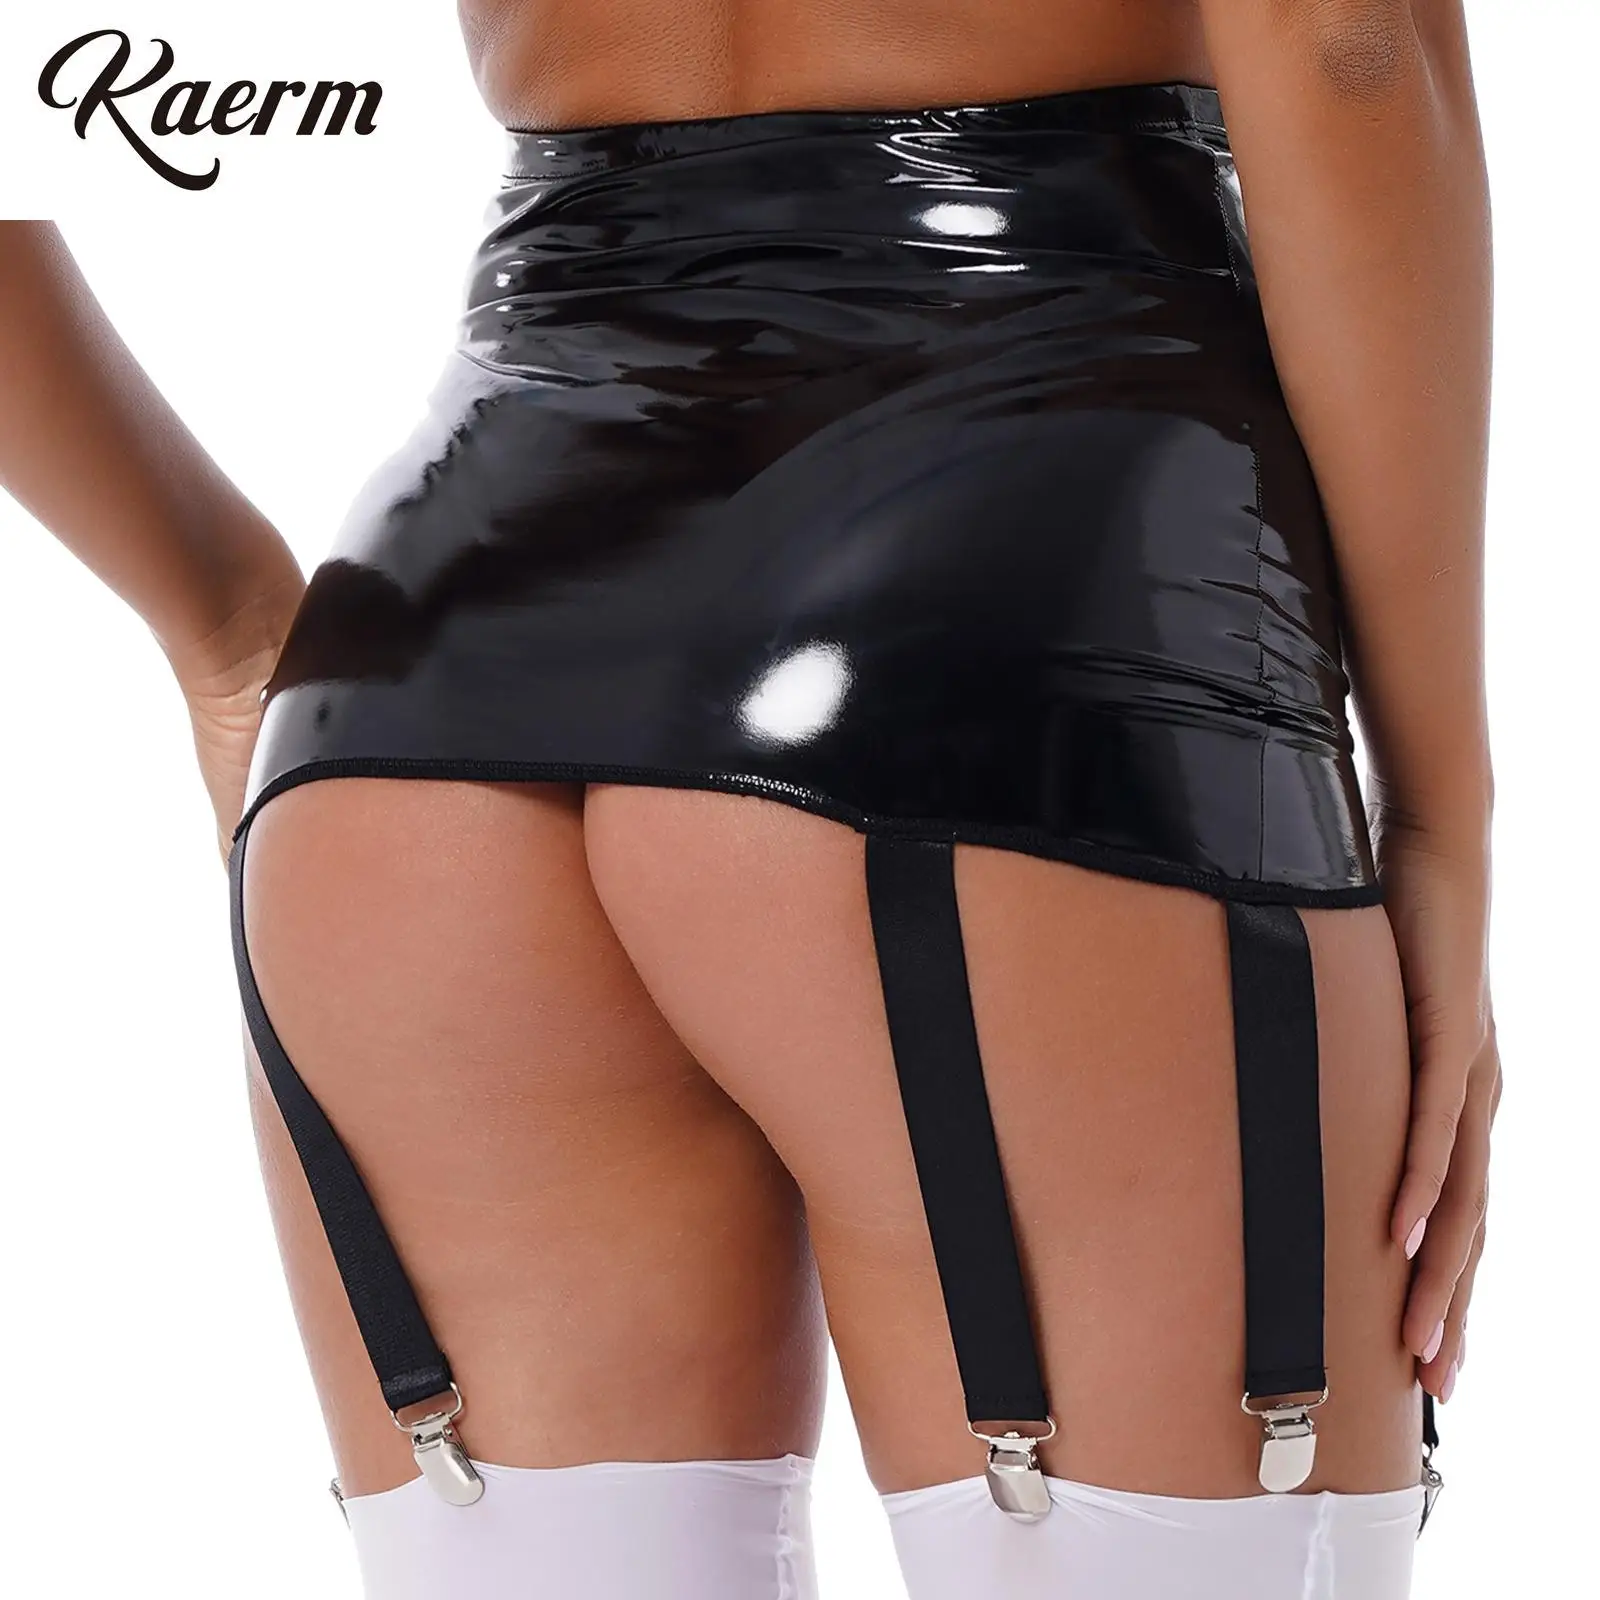 

Women Wet Look PVC Leather Bodycon Slim Skirts Suspenders Garter Belt with Six Metal Buckle Clips for Club Dance Show